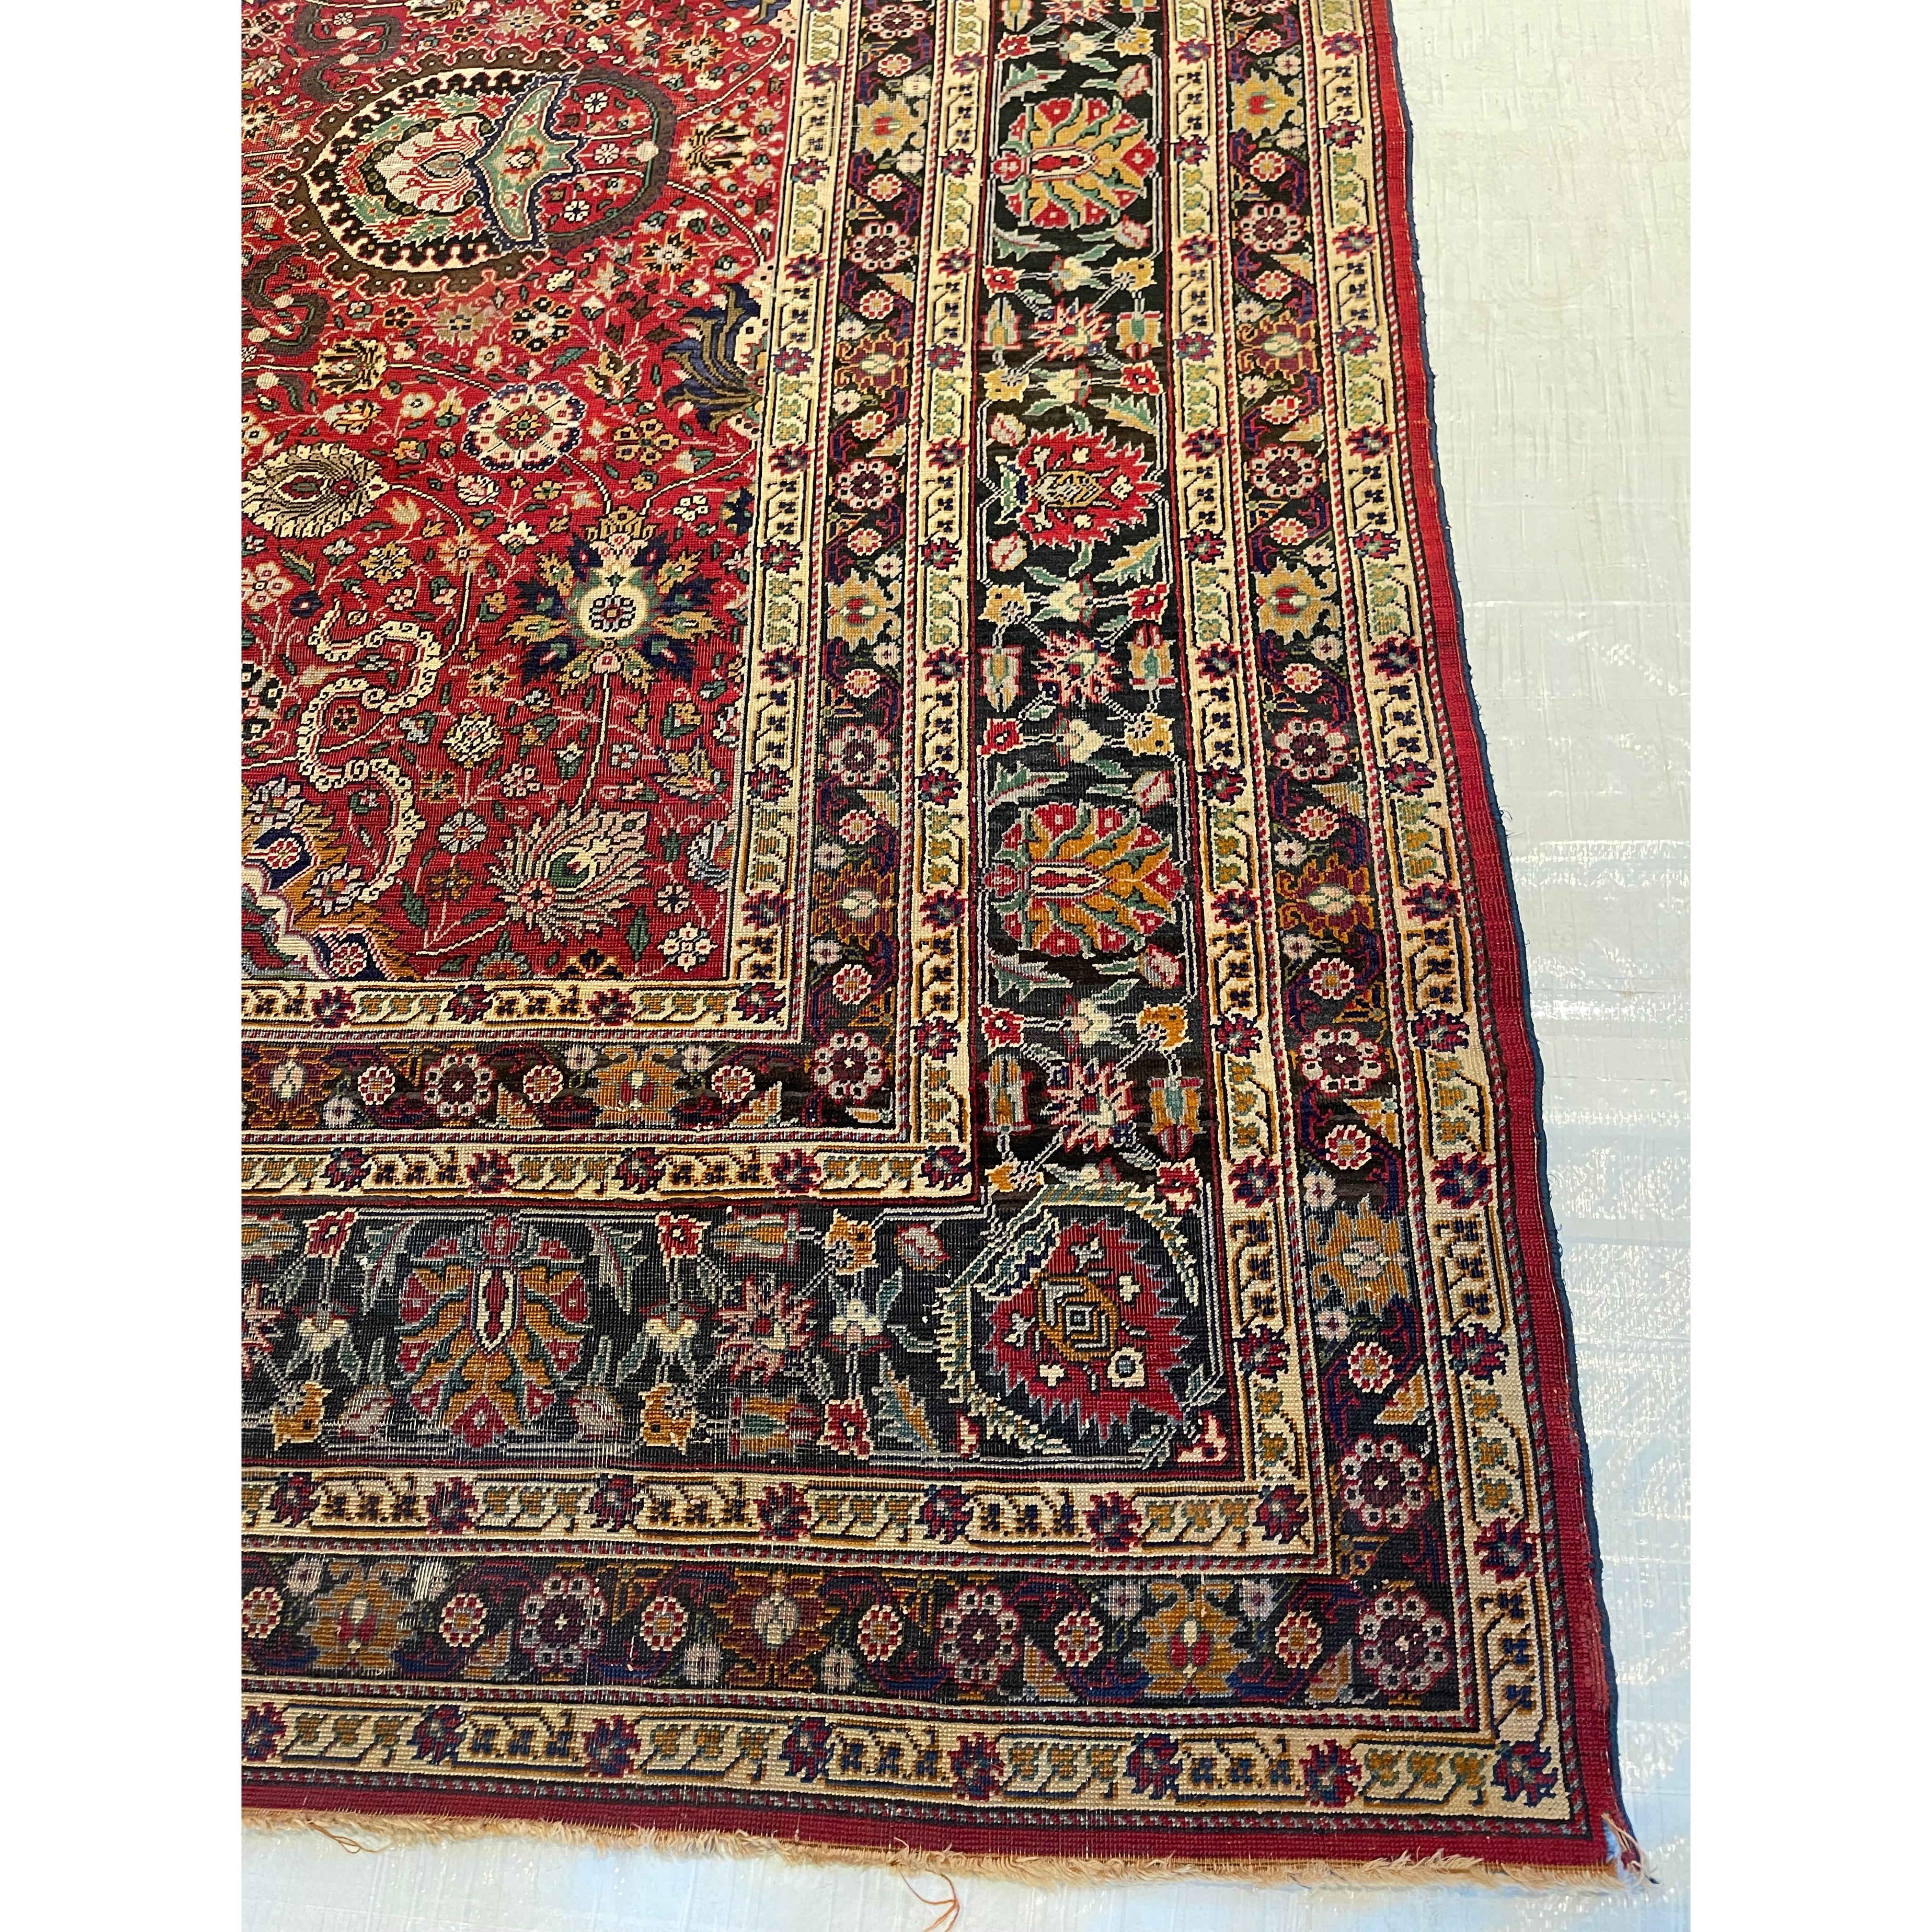 Turkish rugs (also referred to as Anatolian rugs) are, arguably, the rugs that started it all. These carpets were among the first wave of Oriental antique carpets to be exported into Europe. The vintage Turkish rugs were prized commodities and